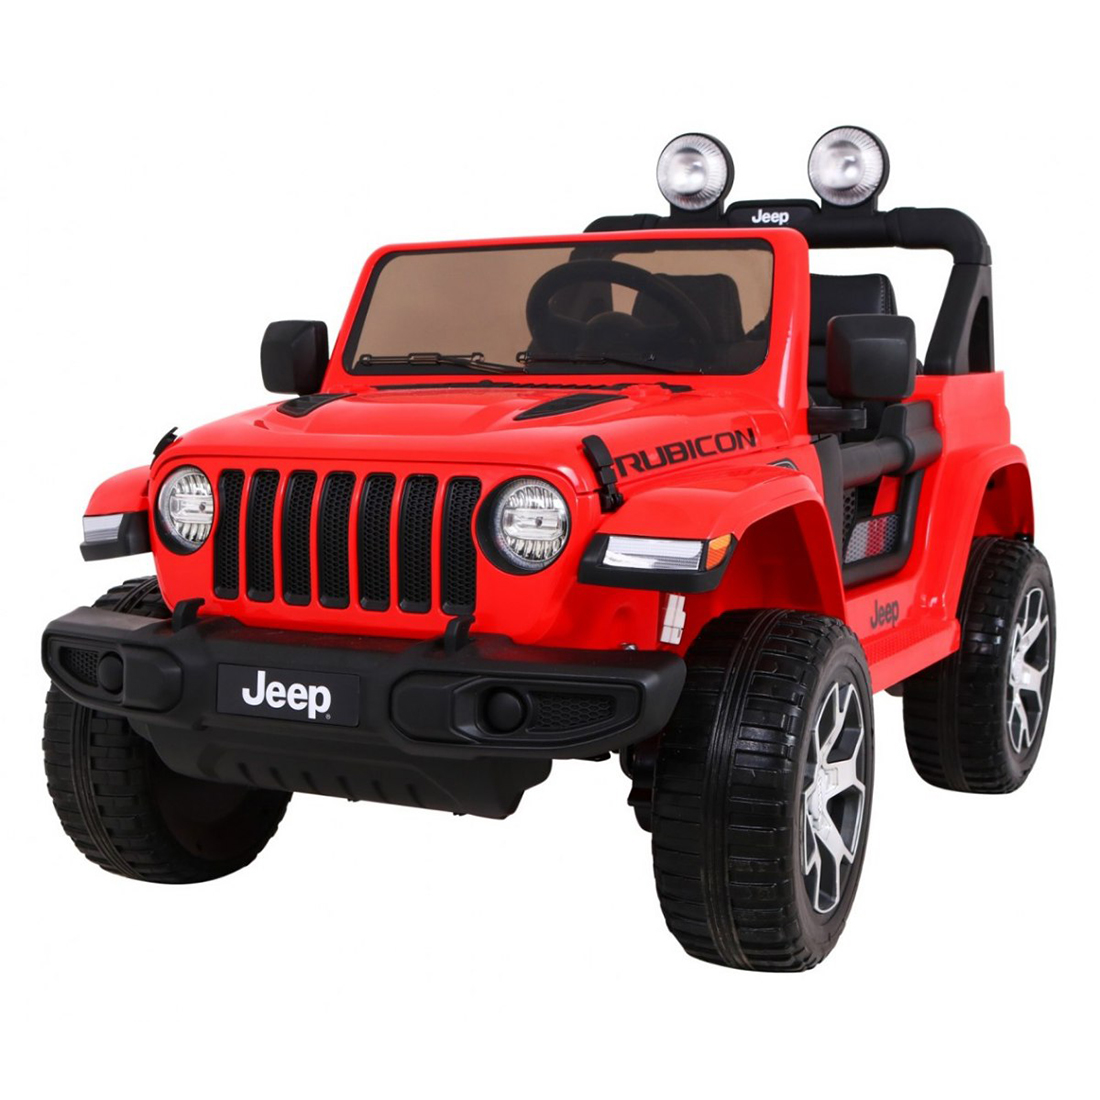 12V Powerful 4x4 Licensed Jeep Wrangler Rubicon Red| Remote control |  Leather Seat - Kids Toys Malta - Electric ride on cars, motorbikes, quads  for children. 6V|12V|24V Battery Kids Cars